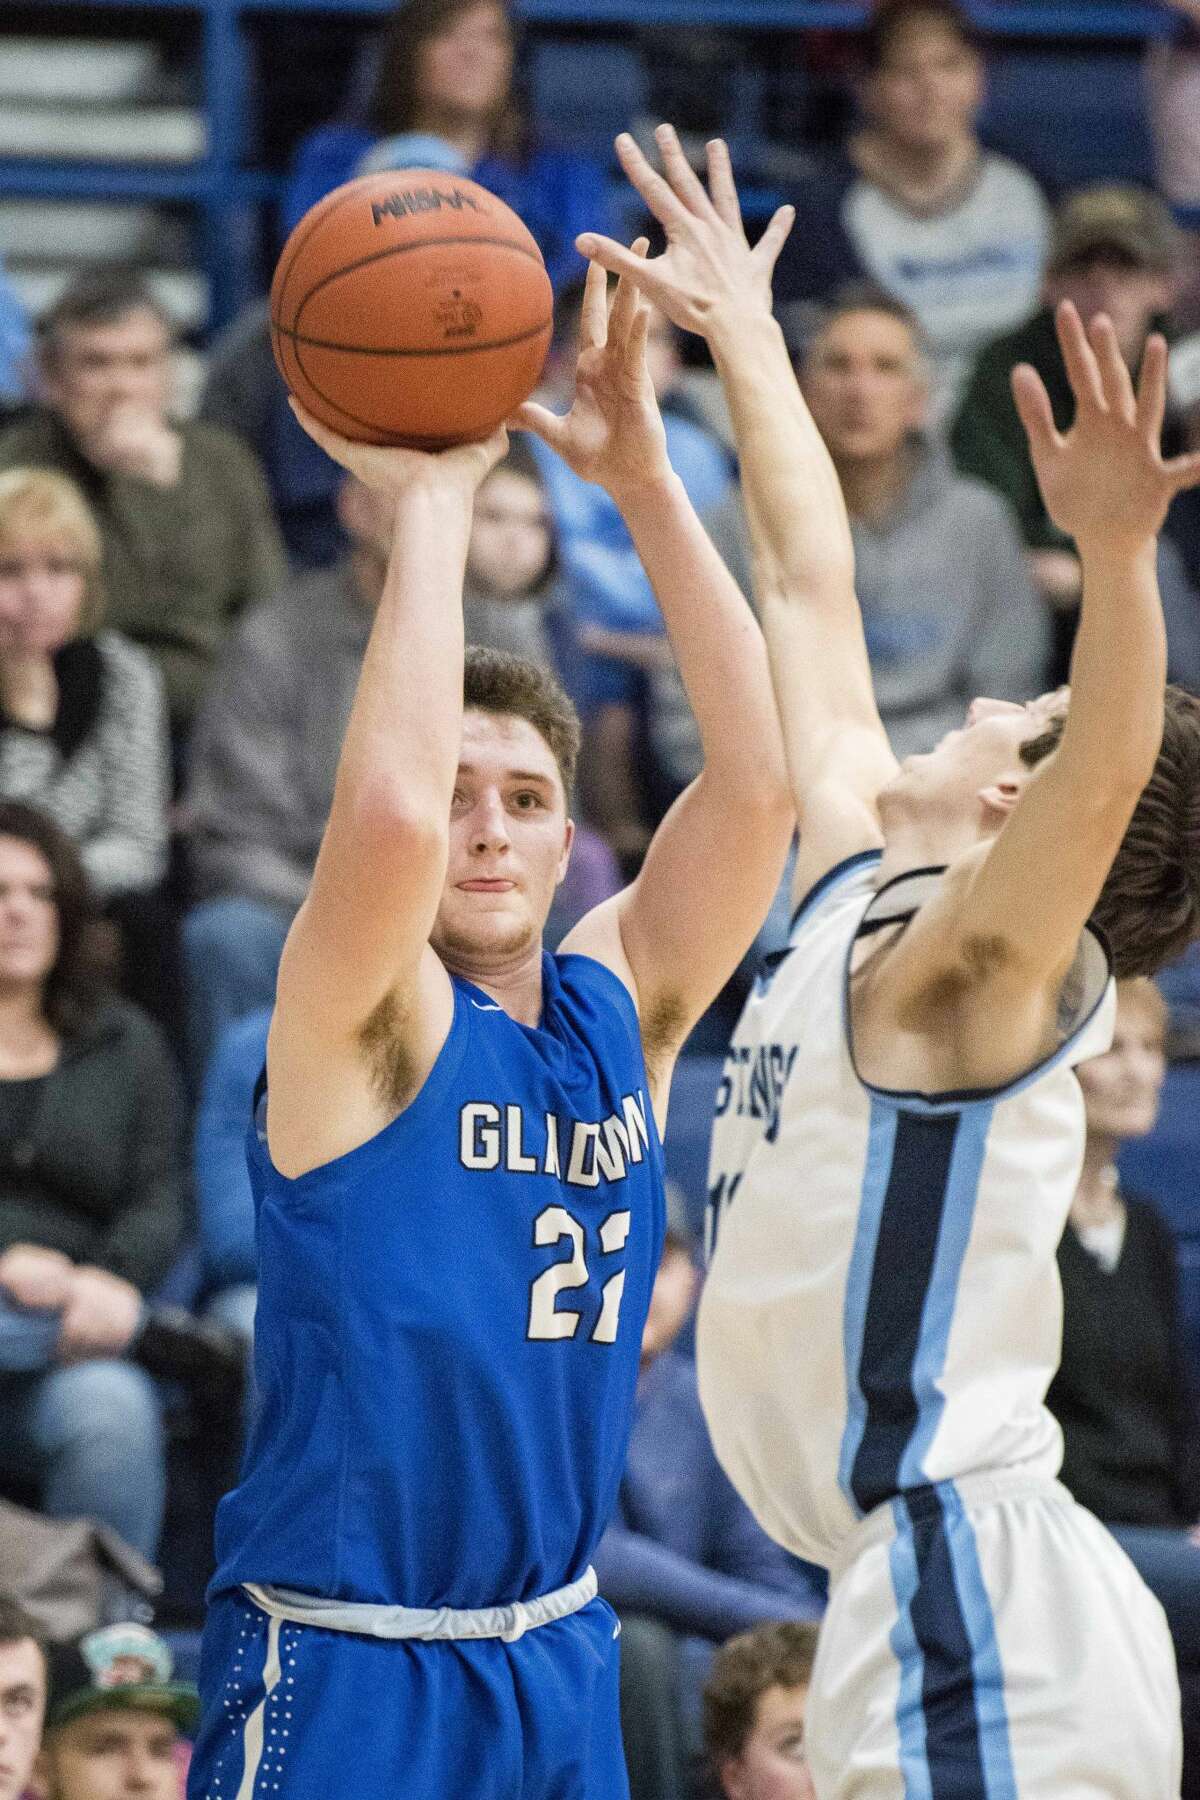 Gladwin senior Max Wentworth takes a shot as Meridian senior Hunter Wishowski tries to block him during a basketball game at Meridian High School in Sanford on Friday. (Danielle McGrew Tenbusch/for the Daily News)